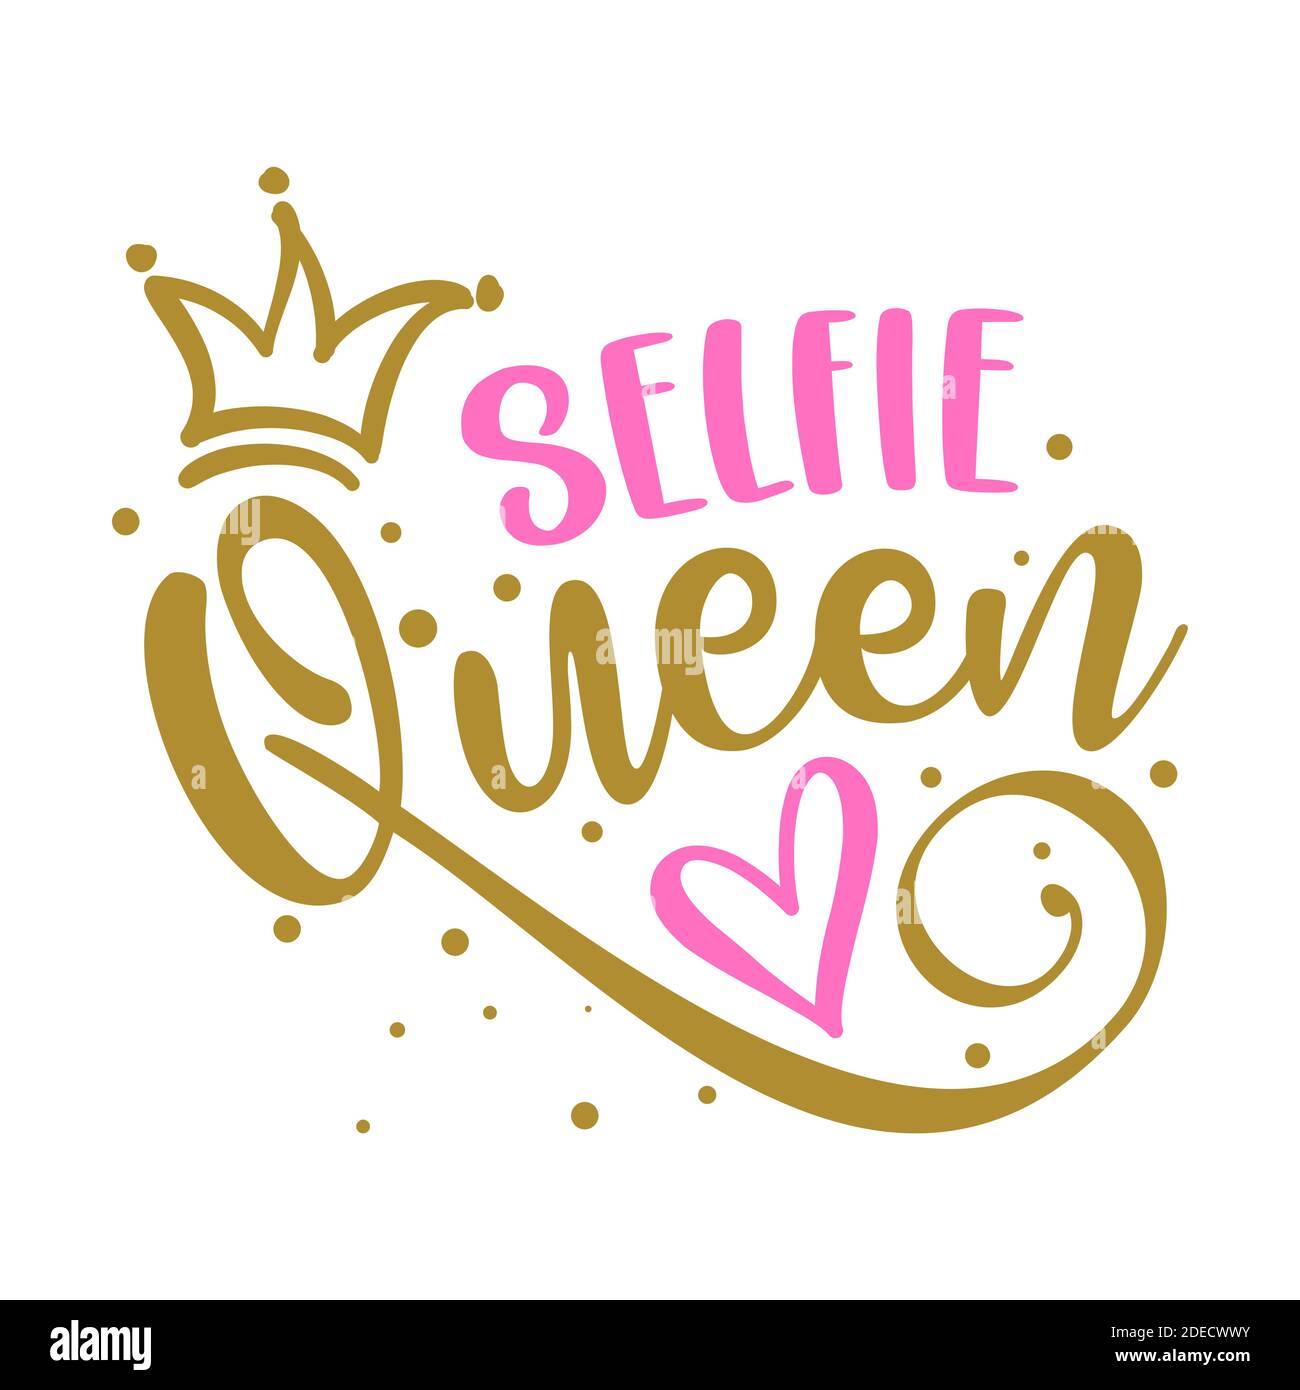 The queen word and - Alamy images stock hi-res photography